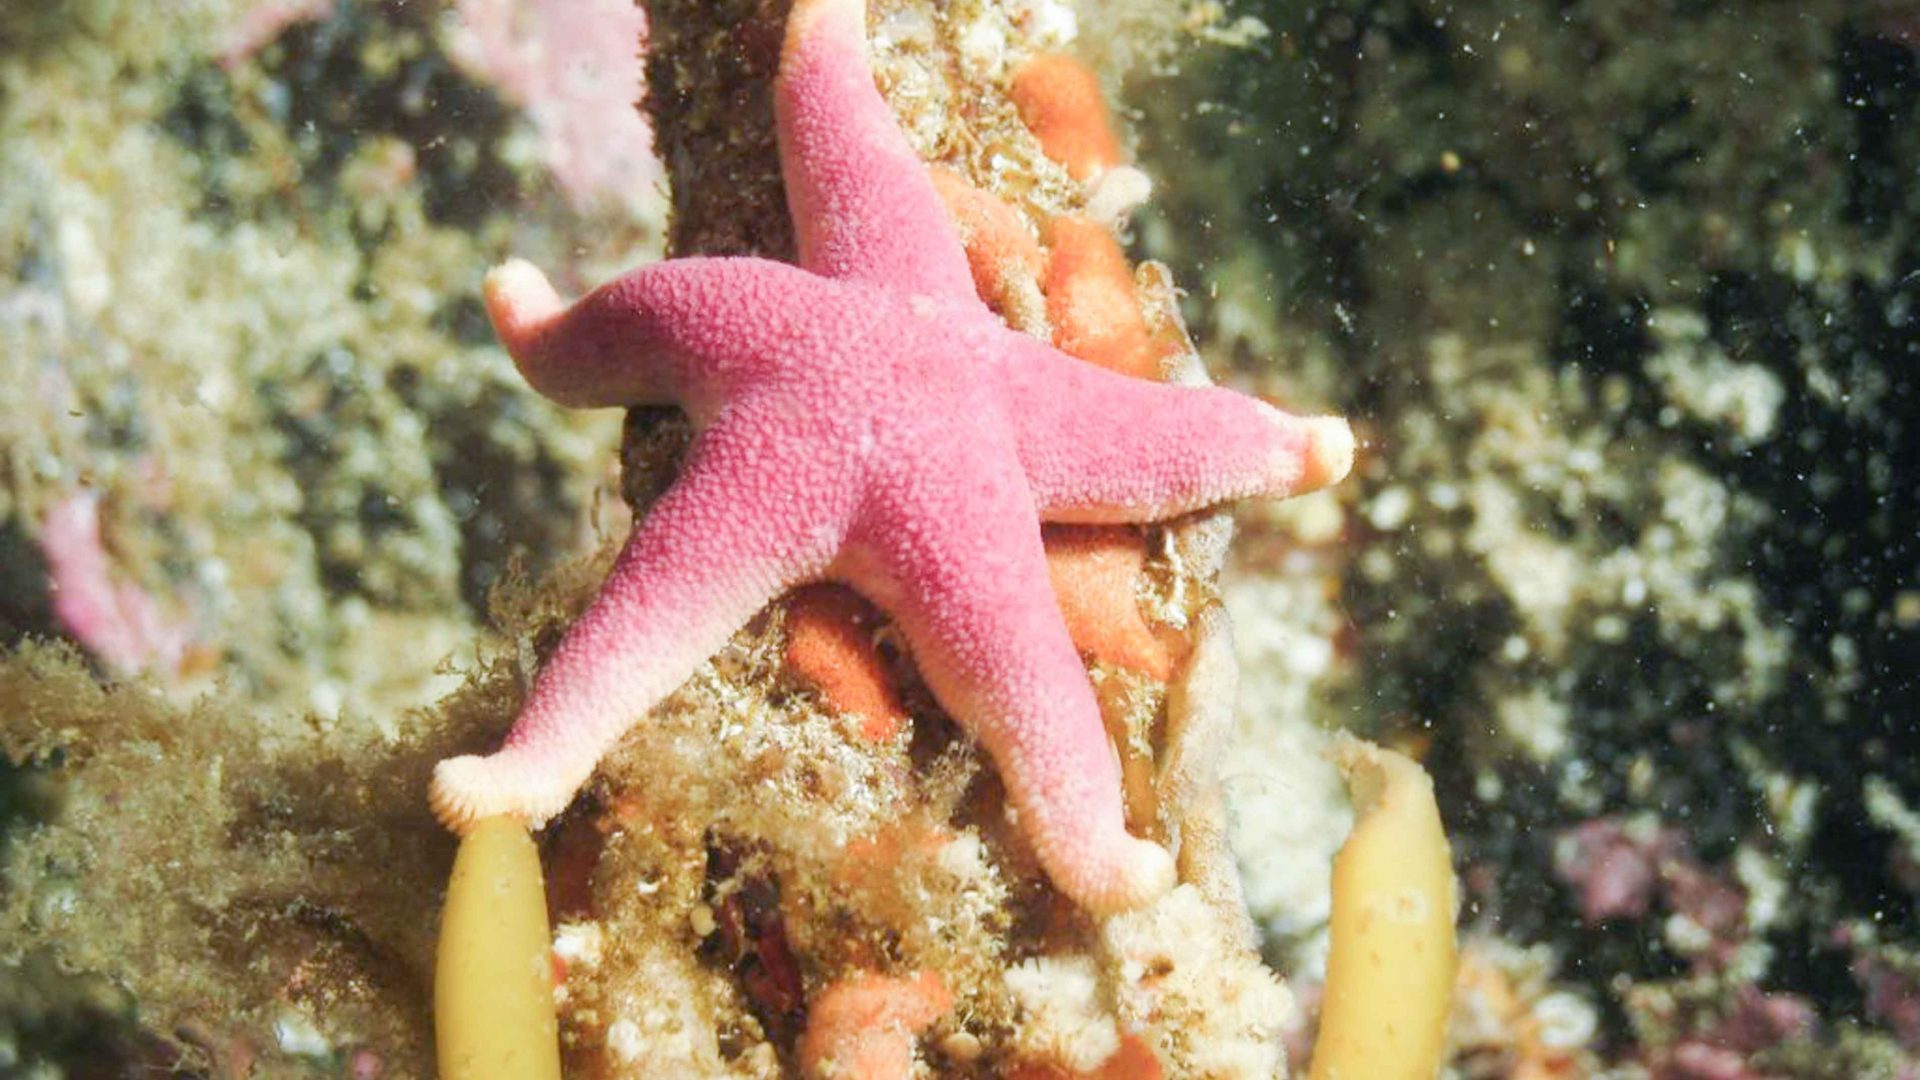 Snorkeling in Scotland; A starfish under the waters in Scotland.